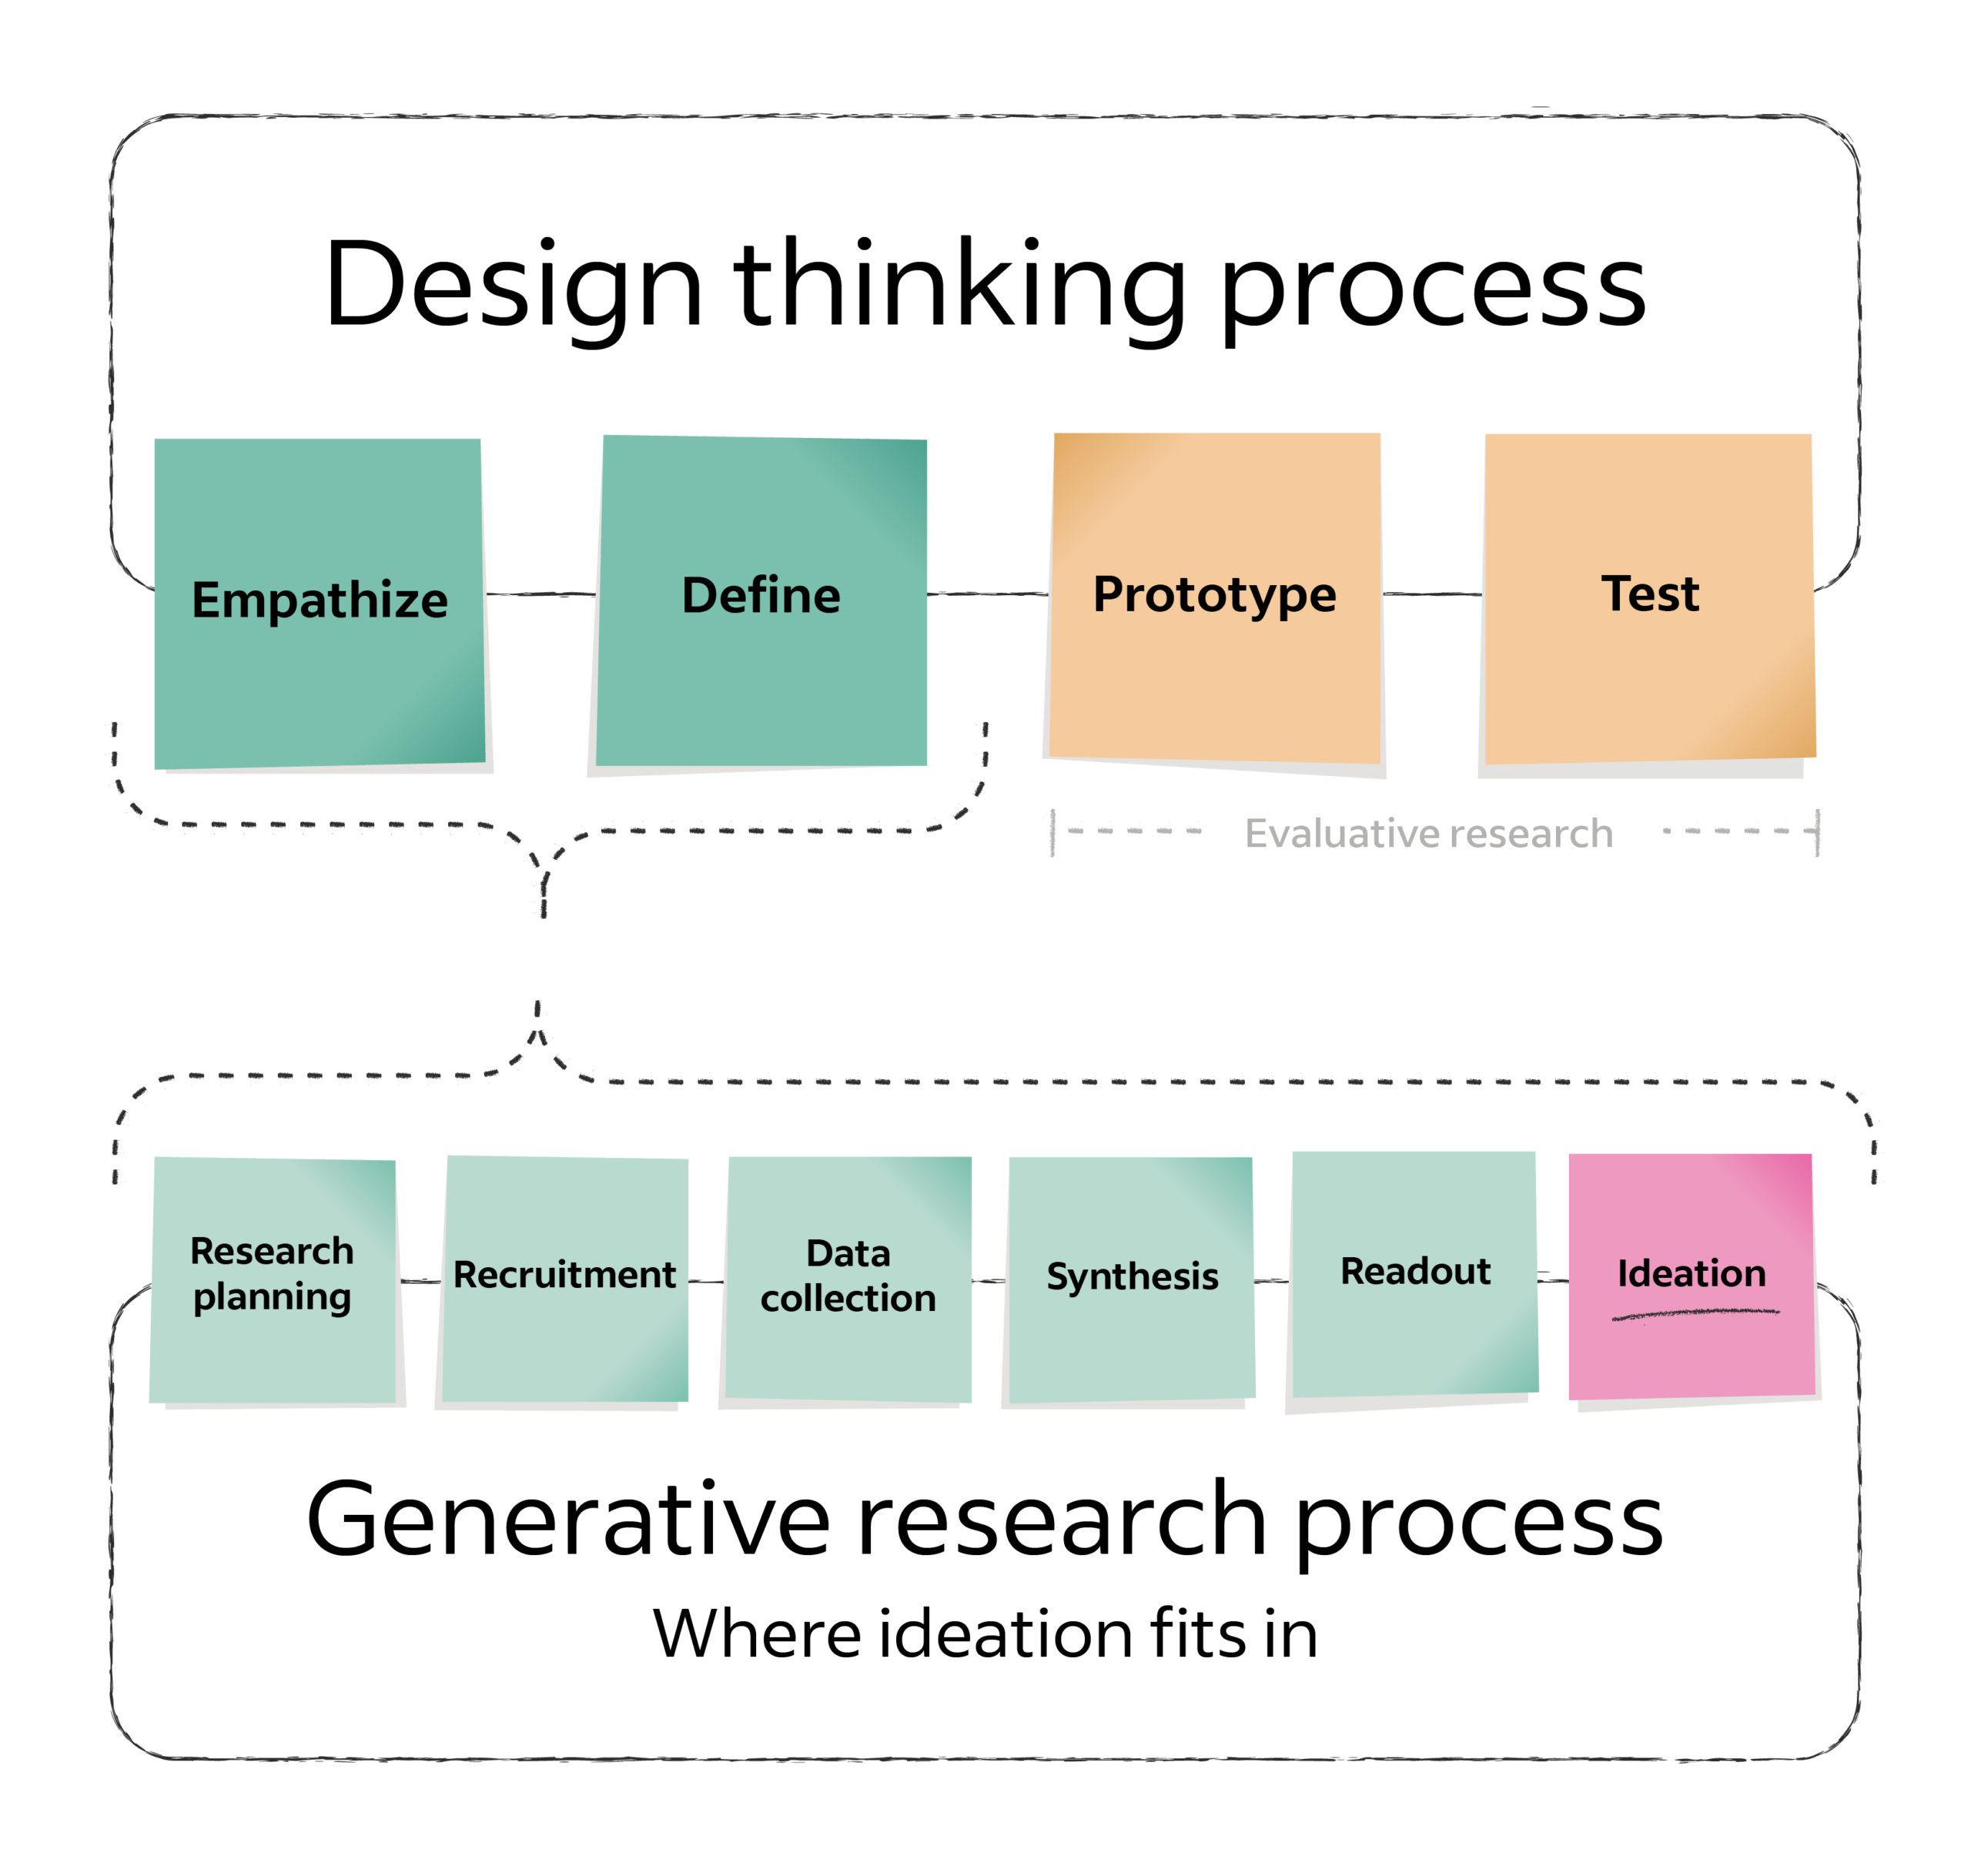 Two rows of sticky notes labeled "Design thinking process" show where evaluative and generative research fit into a larger project. The first row's four sticky notes list design phases: Empathize, Define, Prototype, and Test. The latter two are labeled "Evaluative research." A dotted line connects the first top stickies to the second row of six stickies below. Labeled "Generative research process, where ideation fits in," it breaks down the six stickies: Research planning, Recruitment, Data collection, Synthesis, Readout, Ideation.